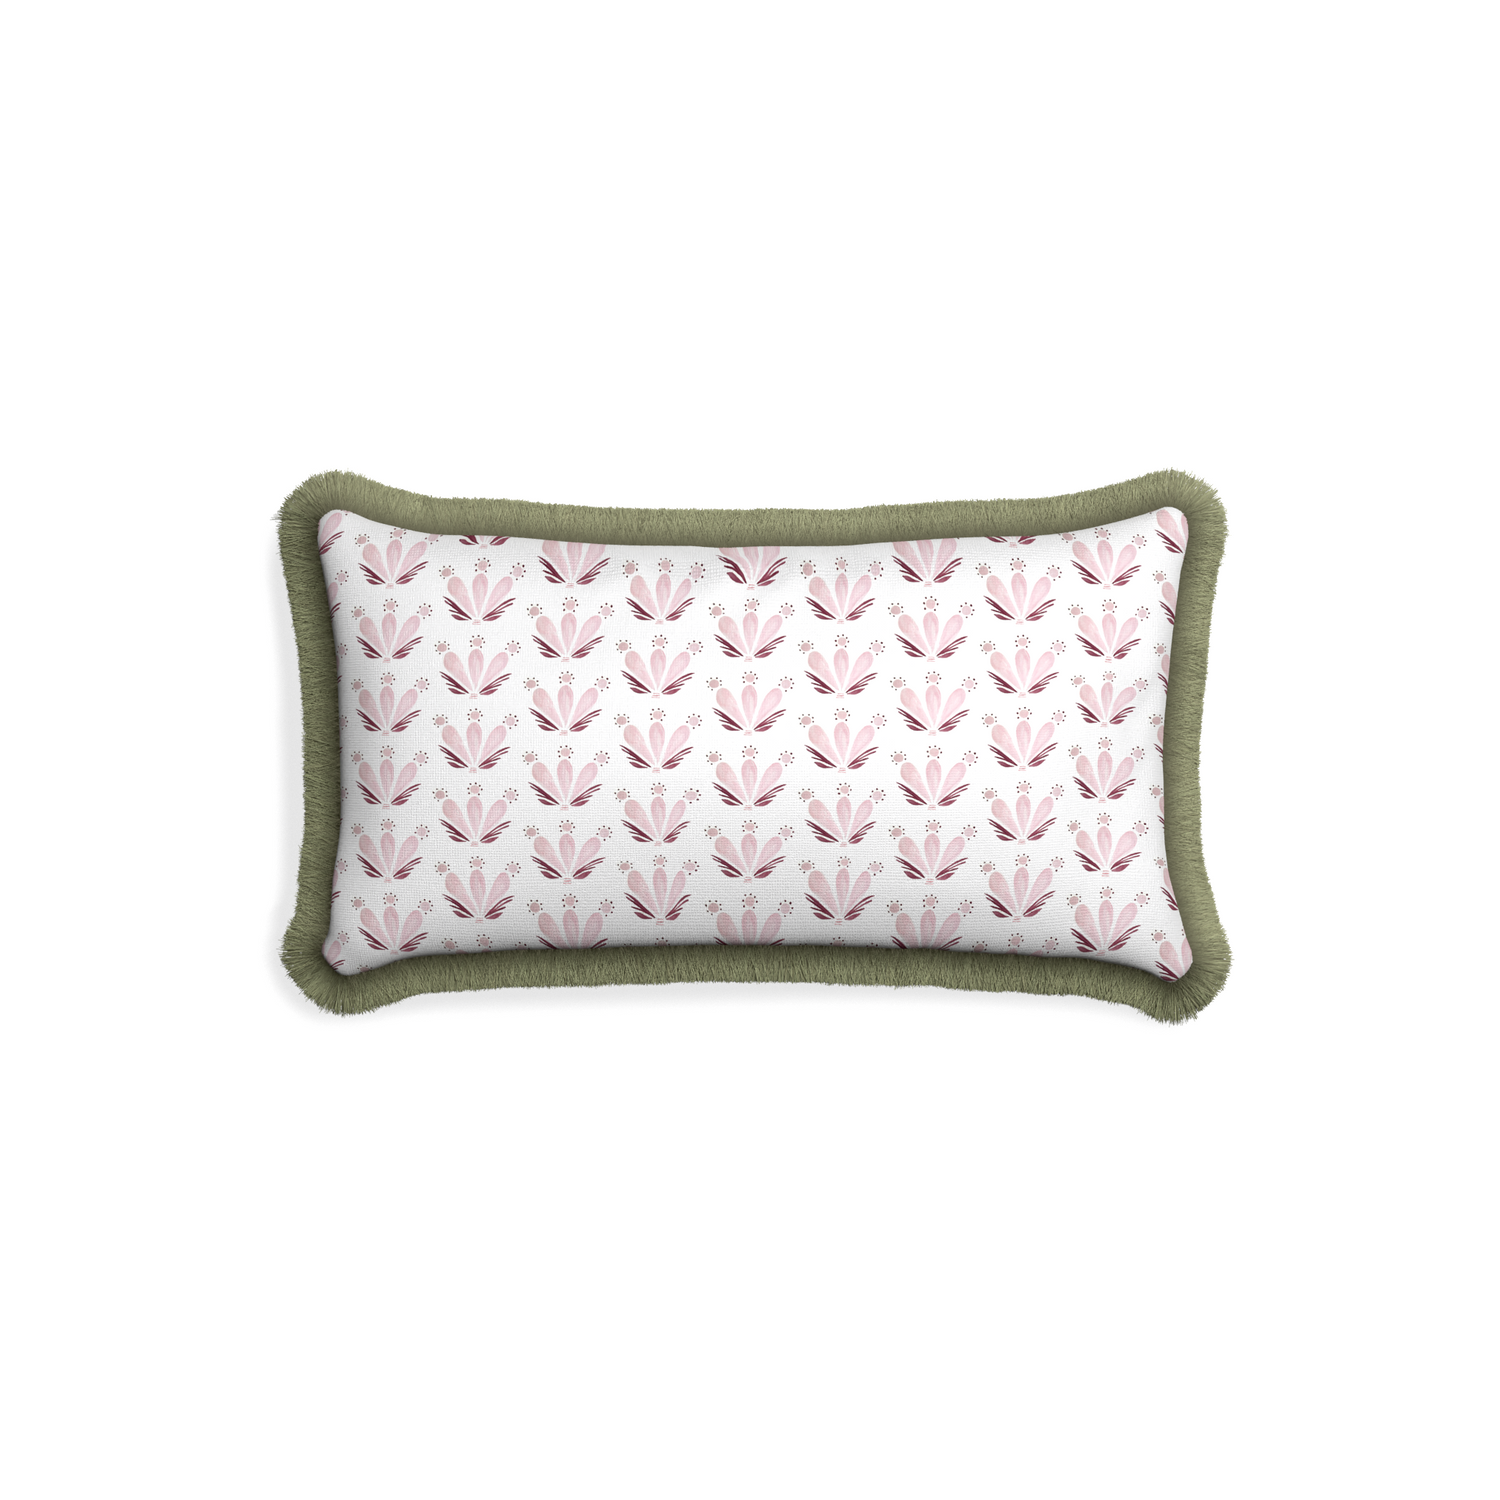 Petite-lumbar serena pink custom pink & burgundy drop repeat floralpillow with sage fringe on white background